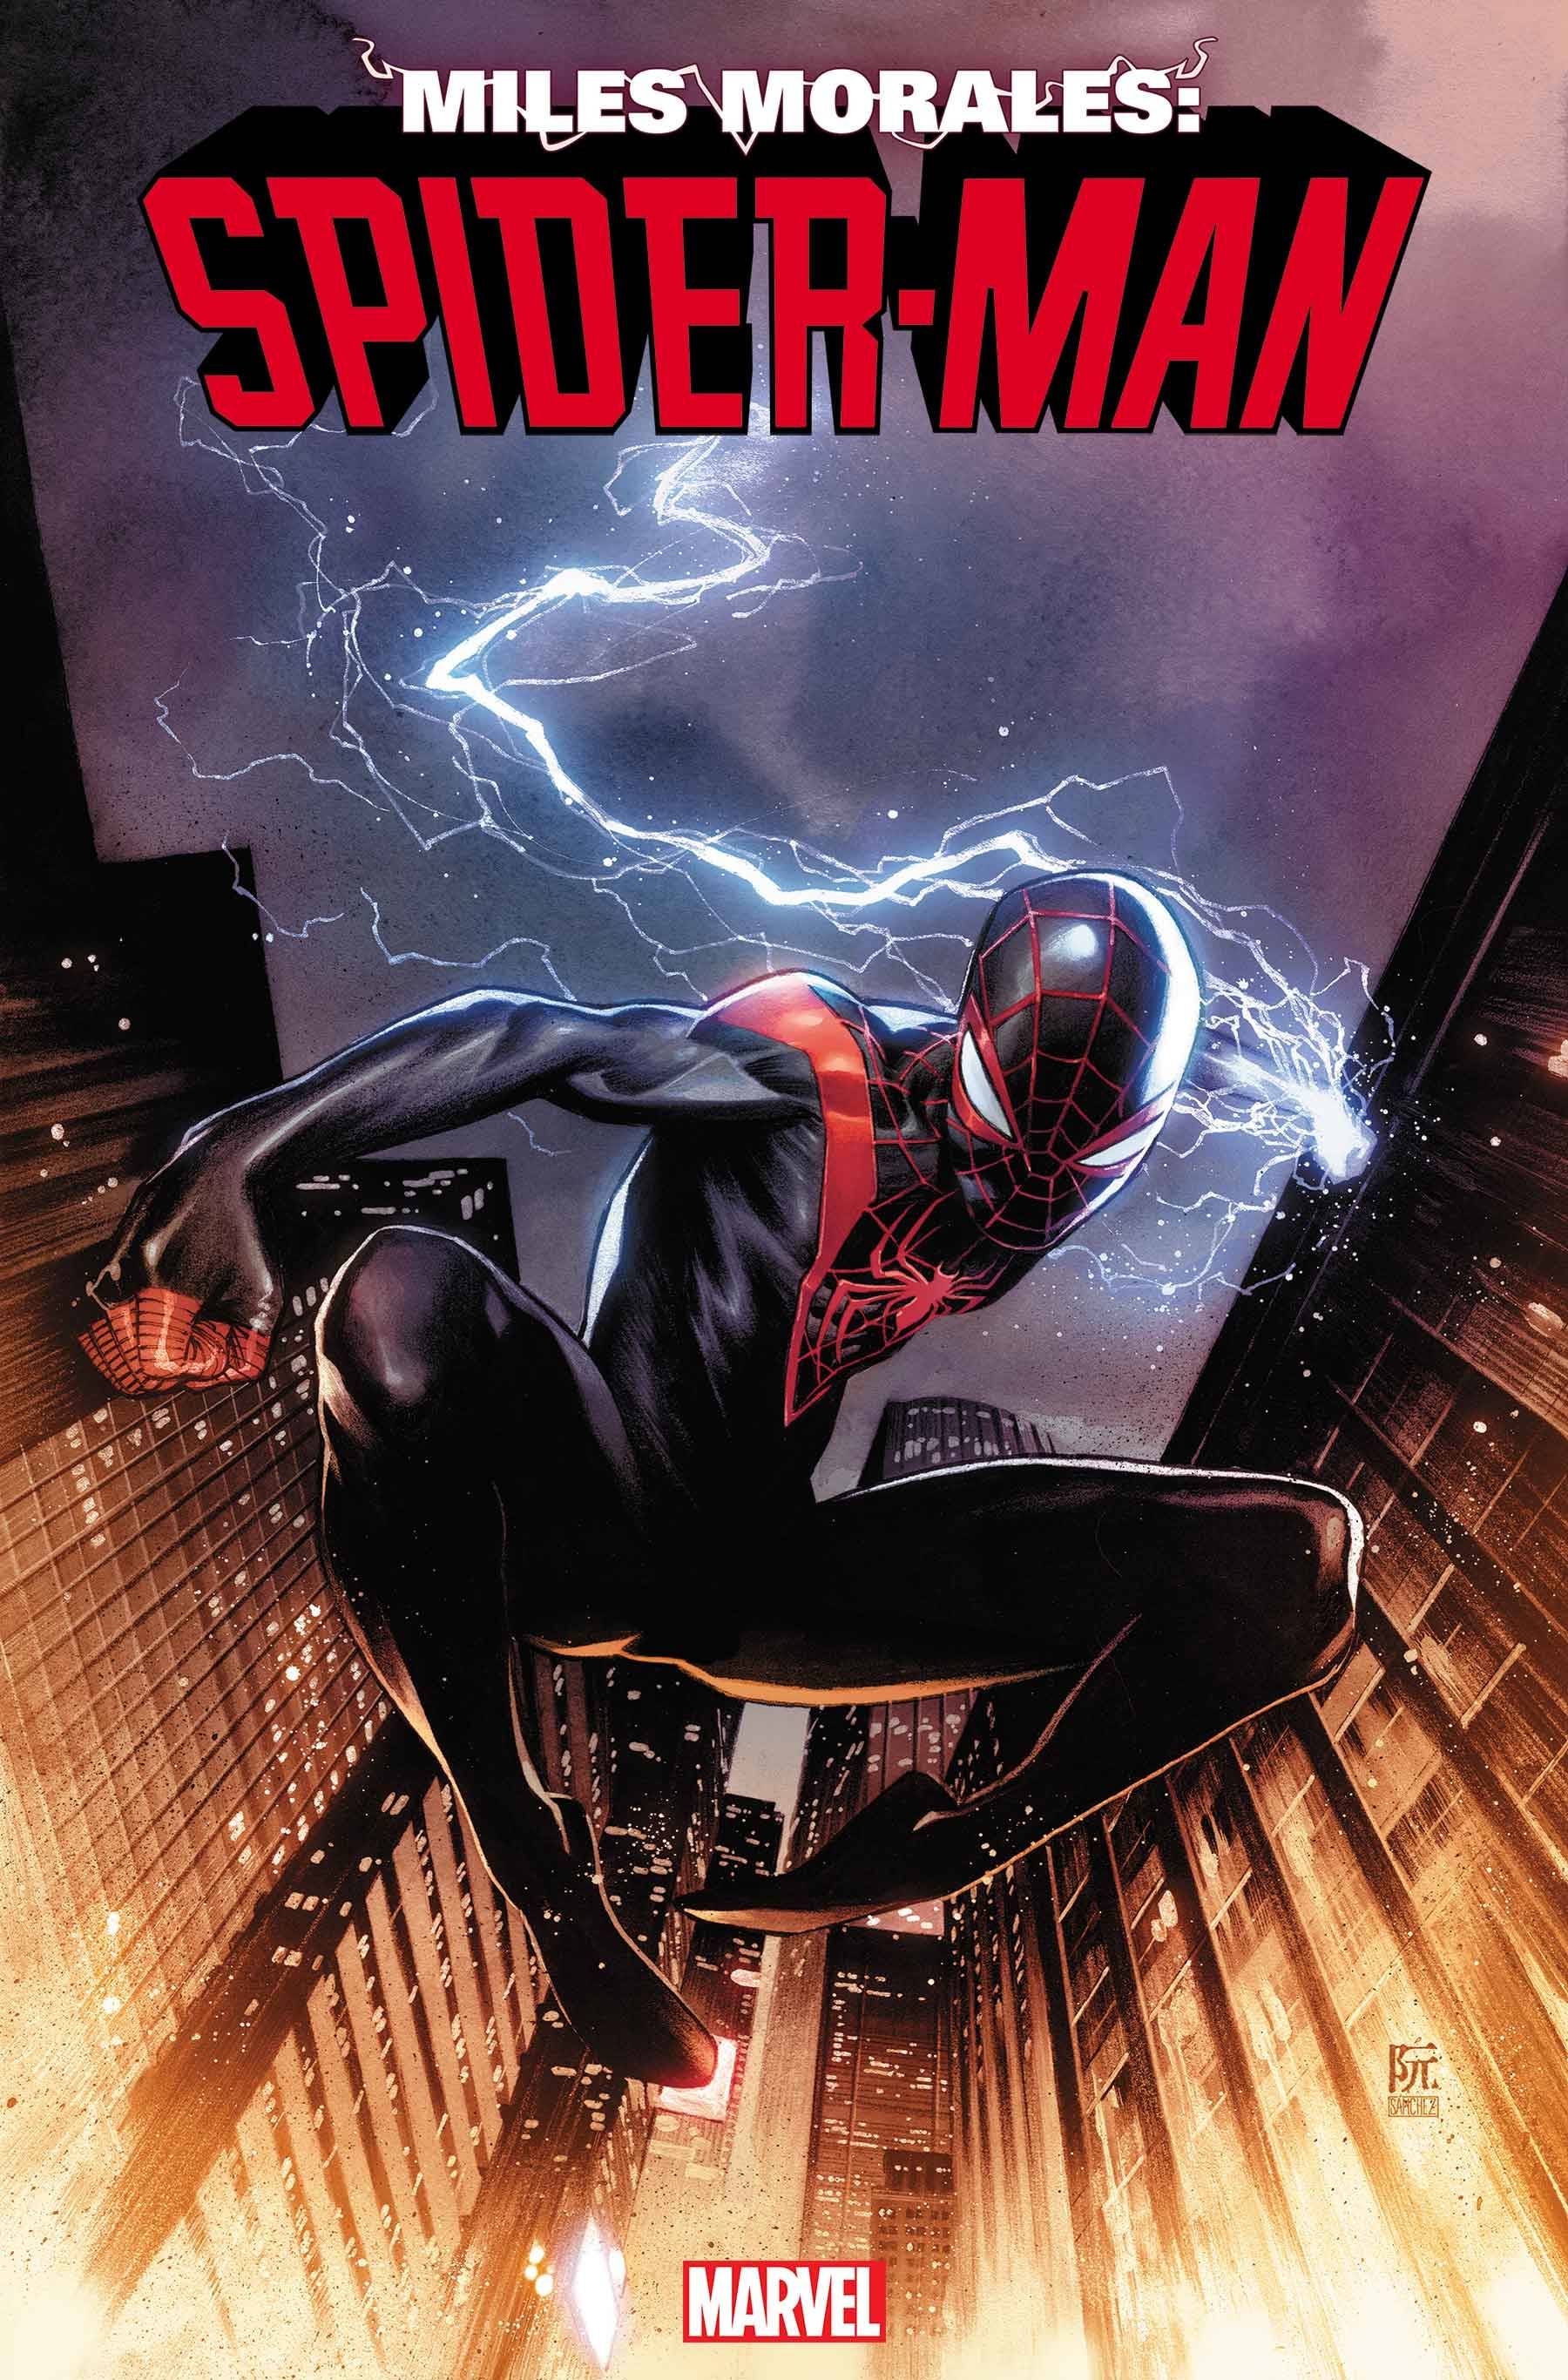 Spider-Man: Miles Morales in the main Marvel Universe is